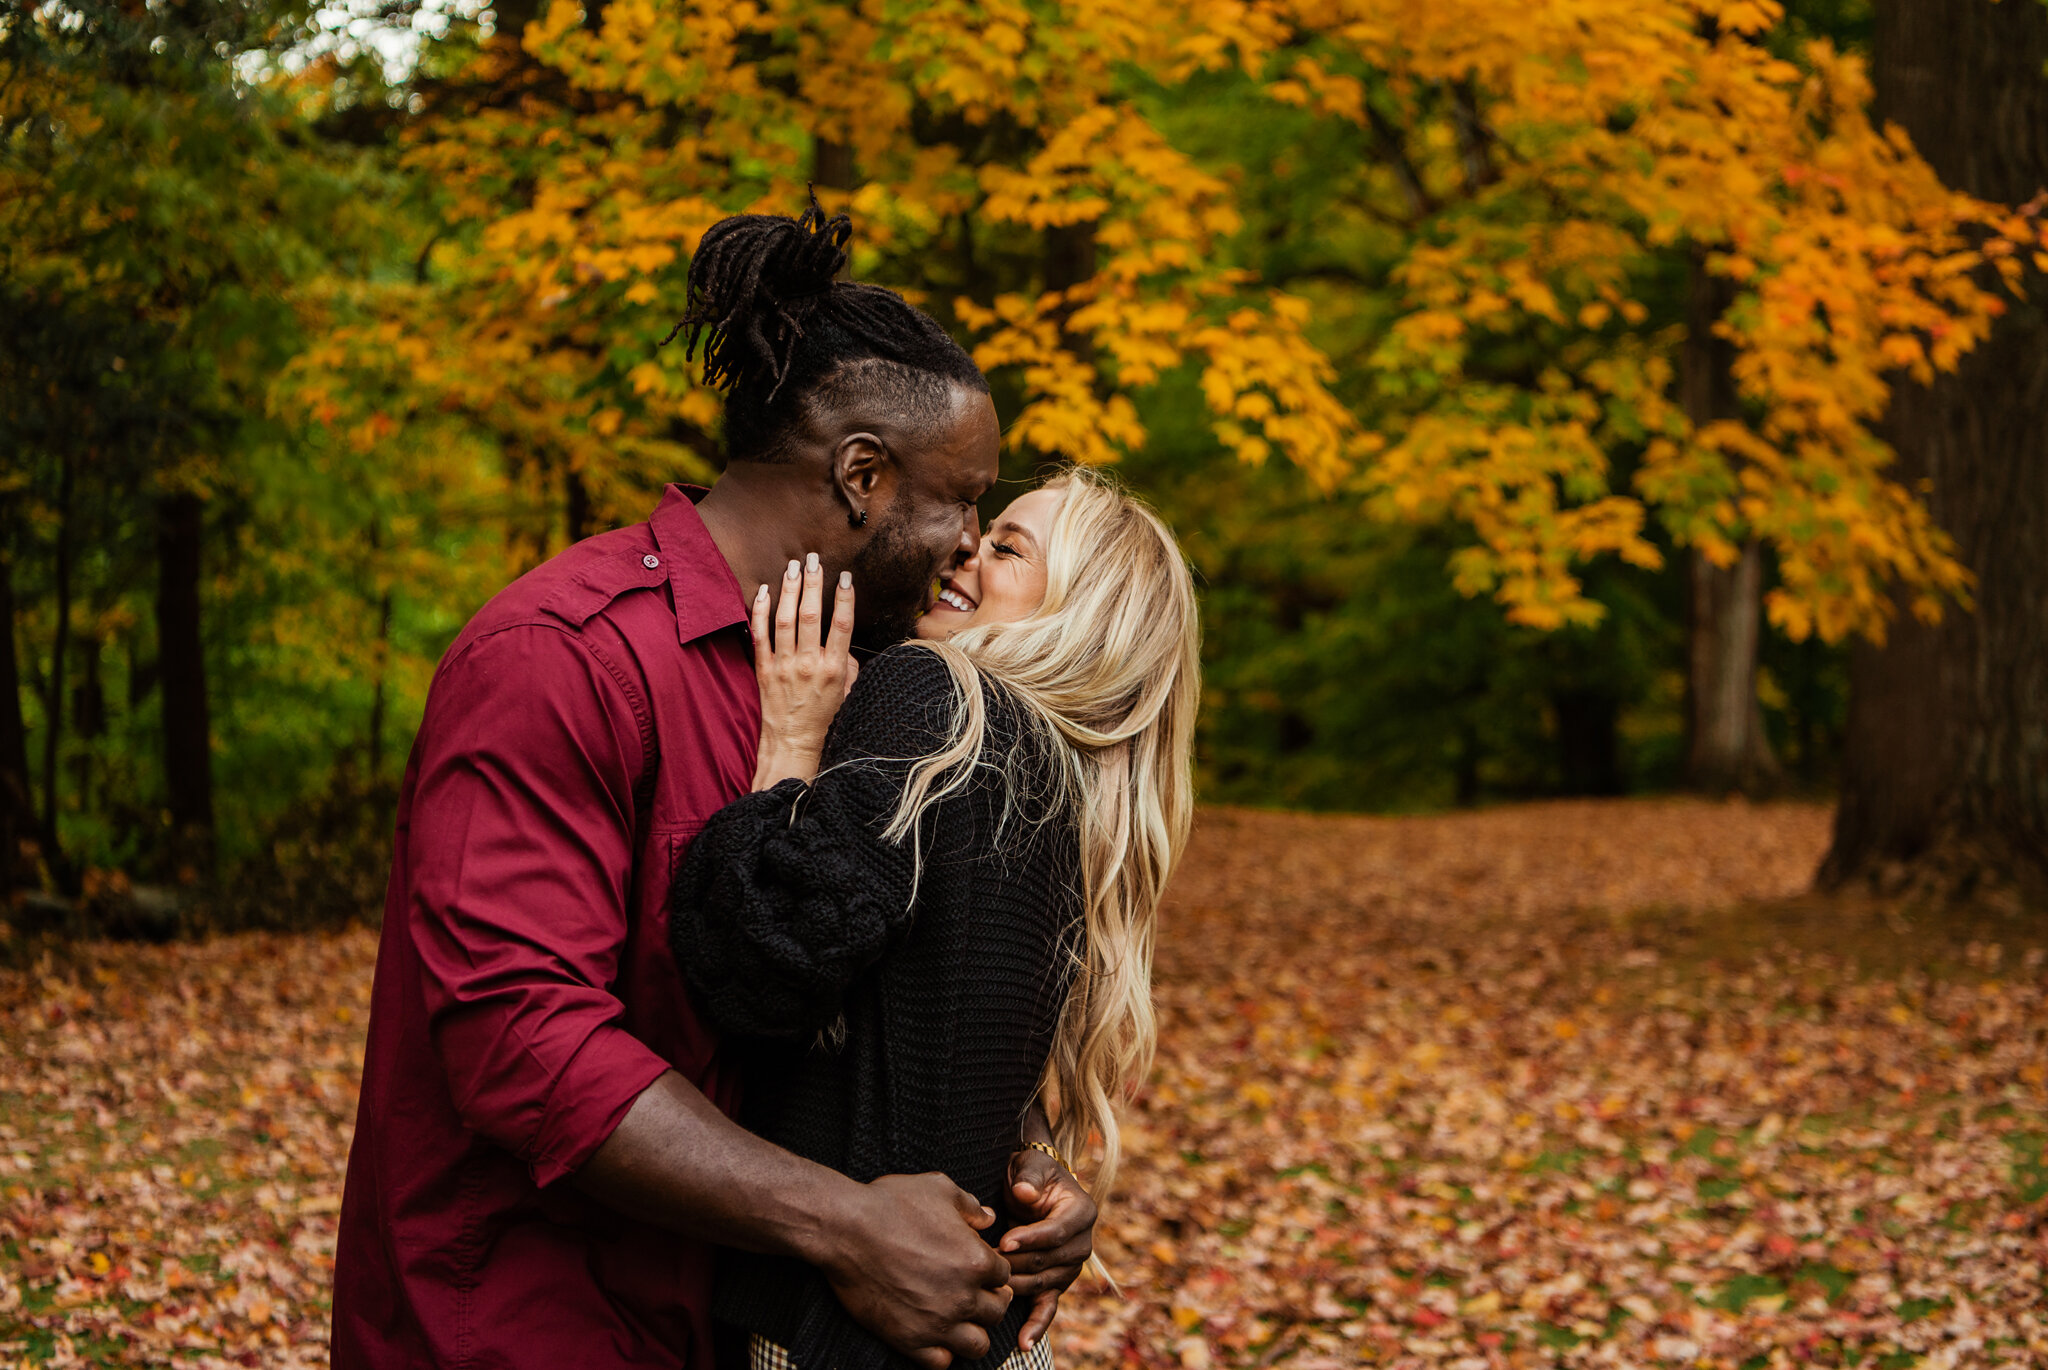 Letchworth_State_Park_Rochester_Couples_Session_JILL_STUDIO_Rochester_NY_Photographer_9273.jpg